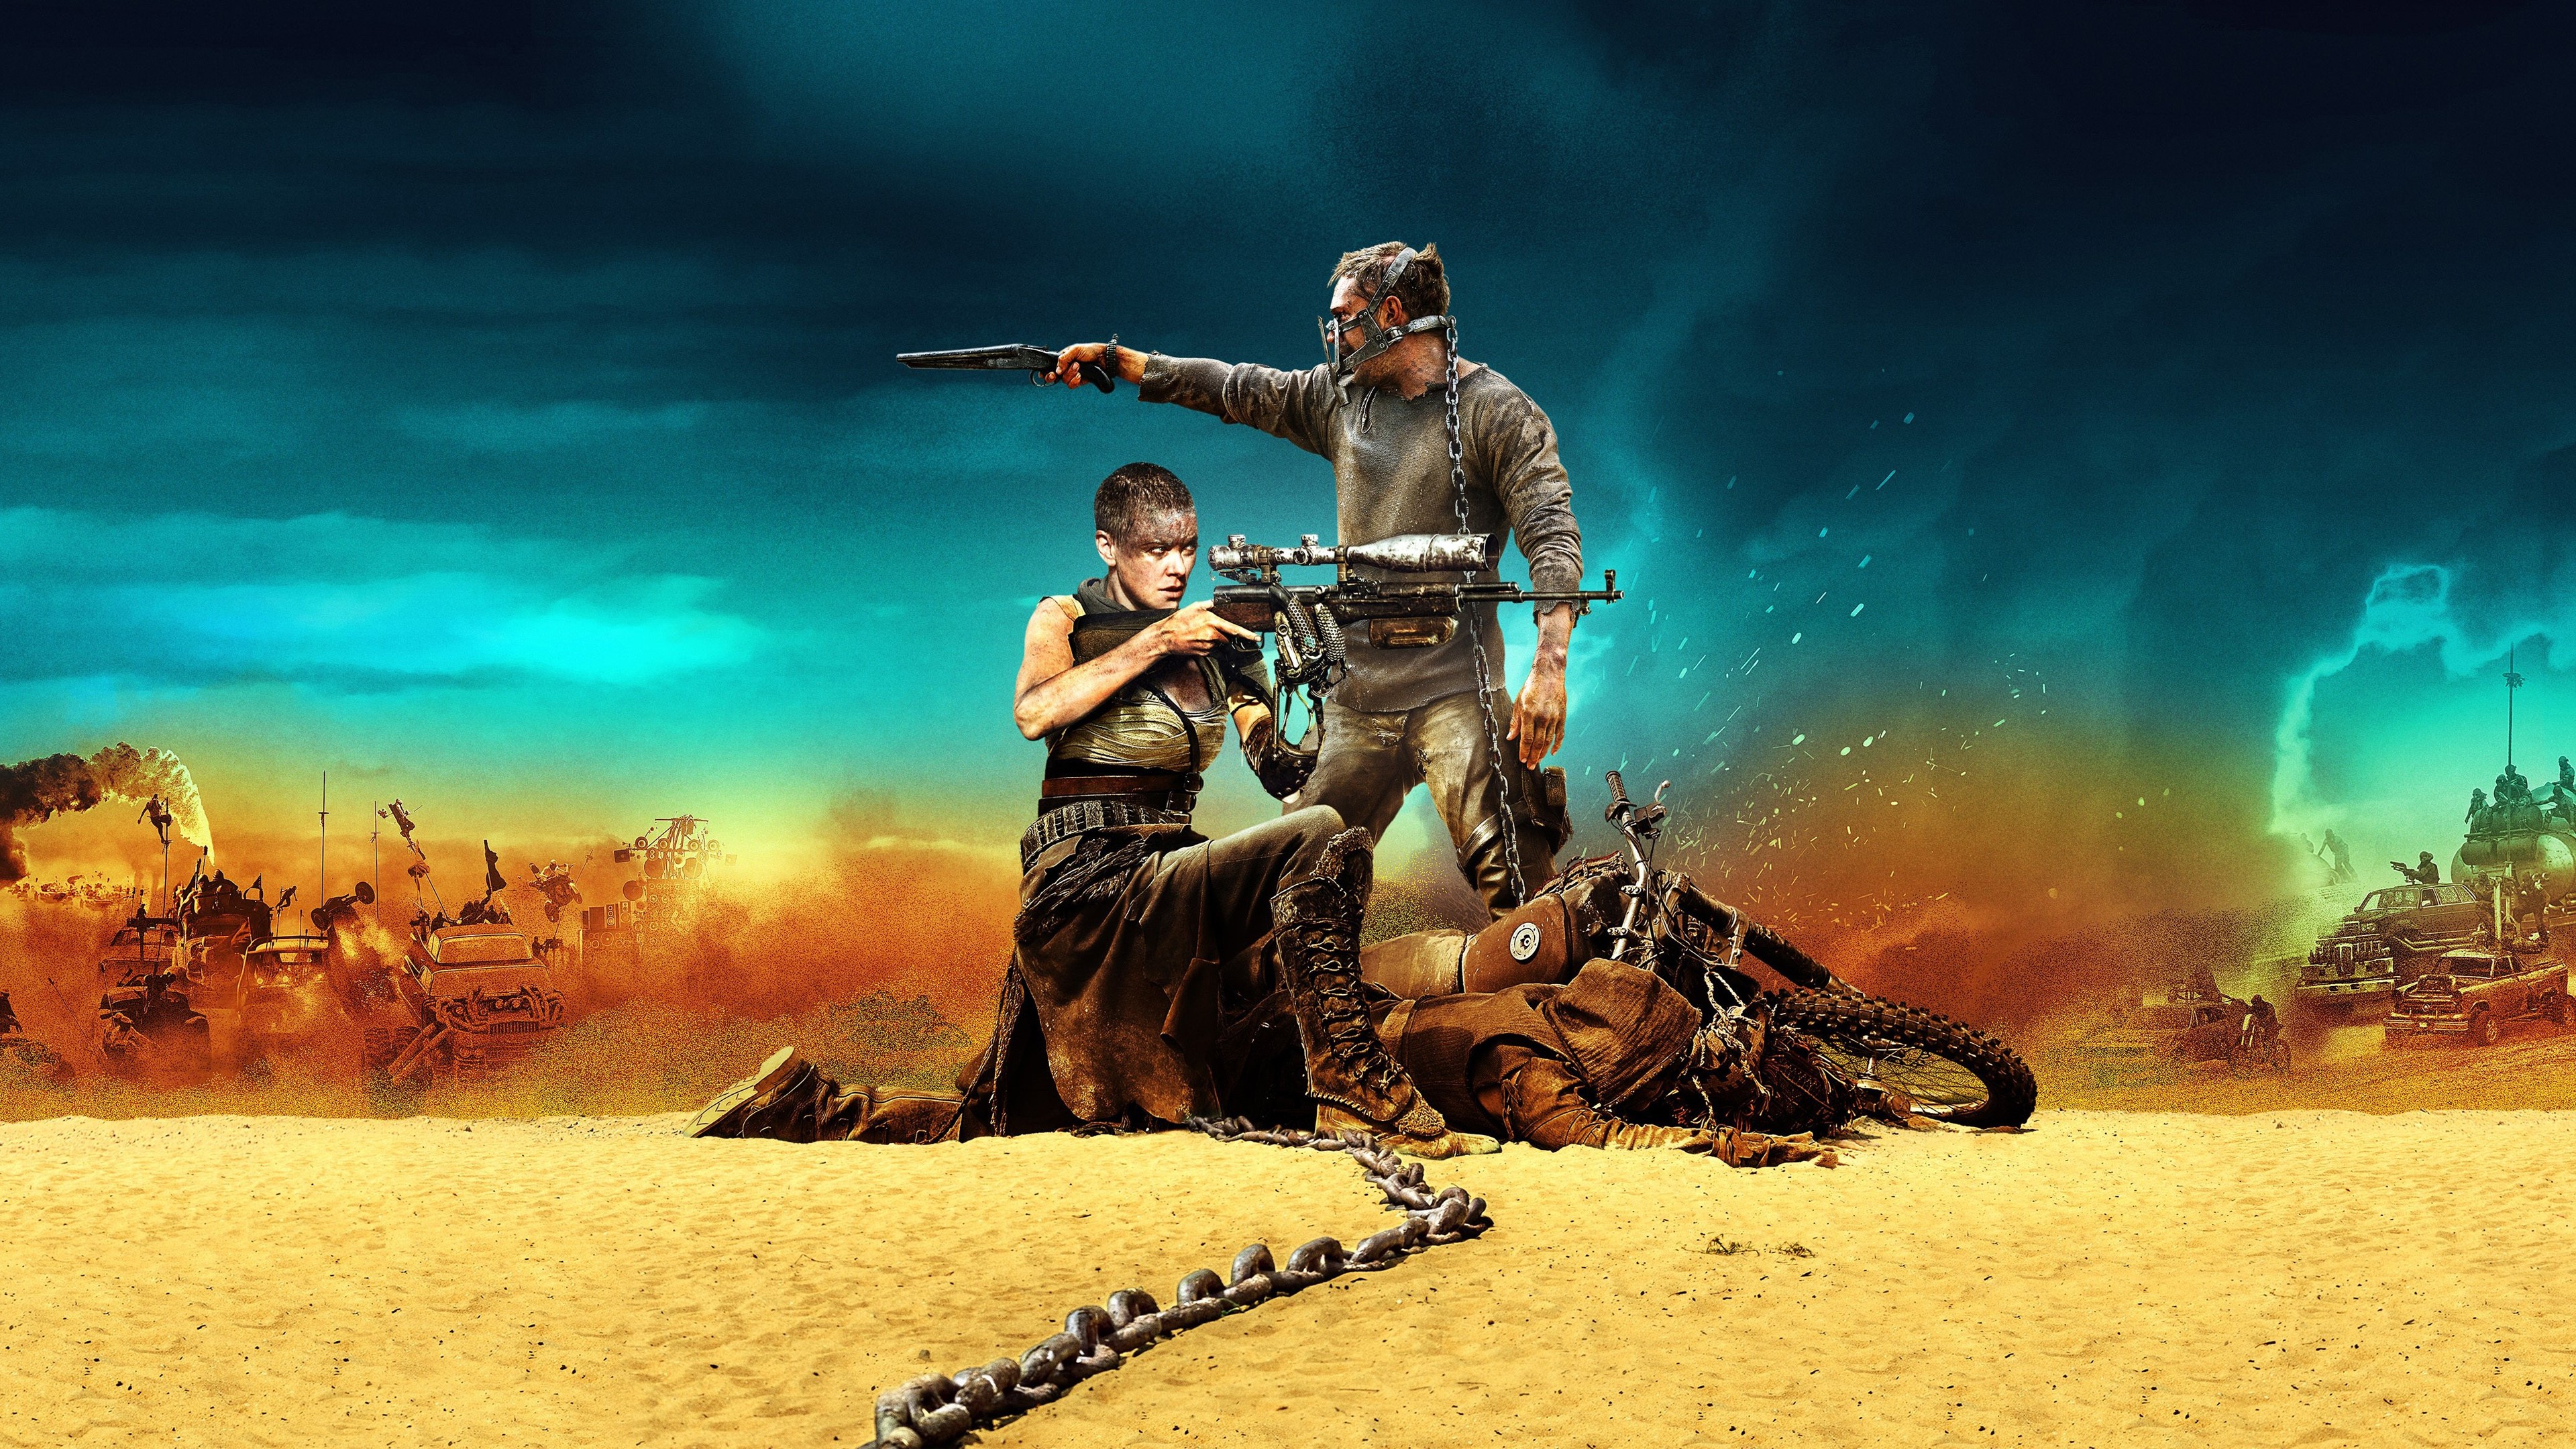 mad max wallpaper hd,games,photography,movie,landscape,animation